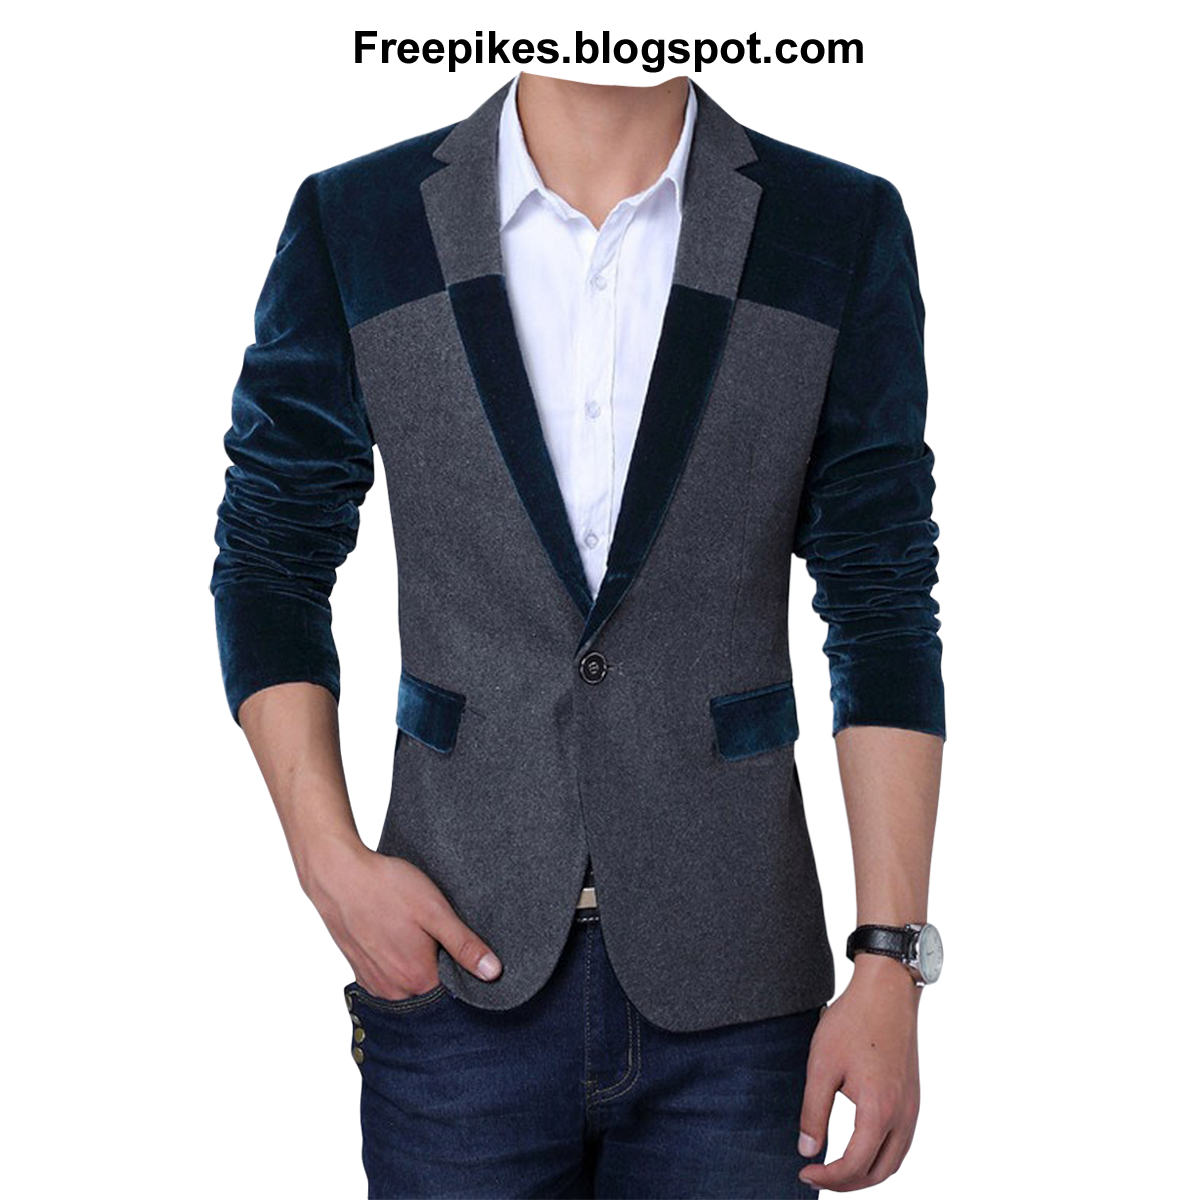 Mens Suit koreon Fashion Dress for Mens in PNG ~ FreePikes